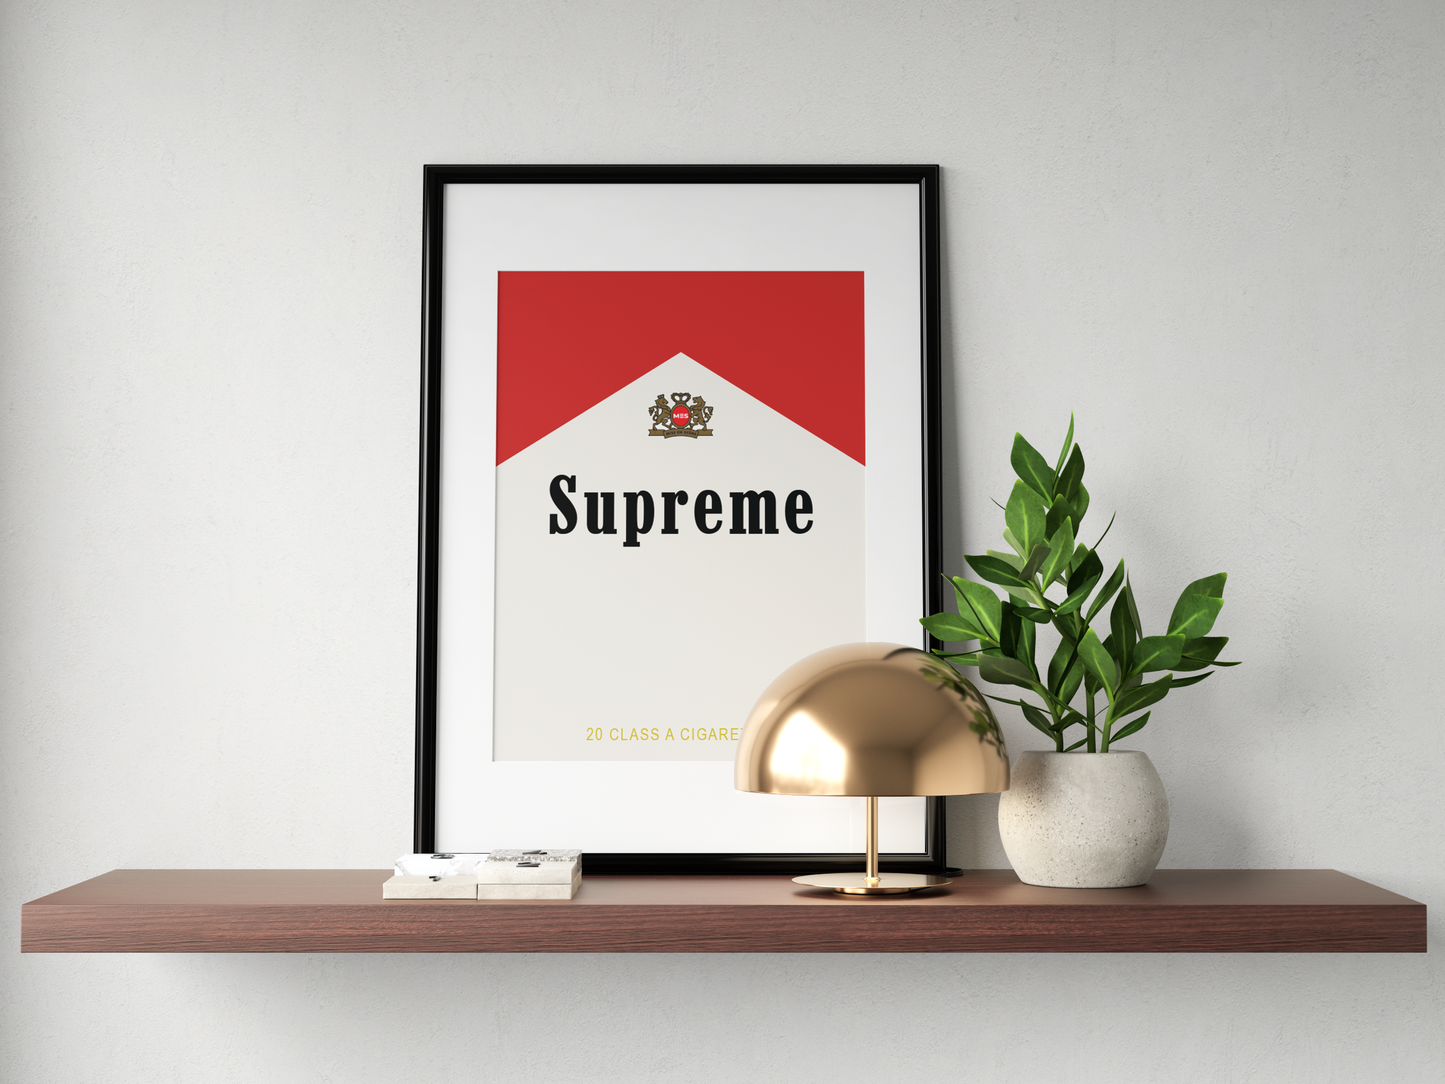 Premium & Sustainable Supreme Marlboro Poster Print. Hand crafted in the UK from the highest quality paper, created with sustainable FSC paper. Texturised inks, brings the poster to life. Available to purchase with a Polcore Recycled Plastic Frame with Perspex screening to let your print do the talking. Global shipping